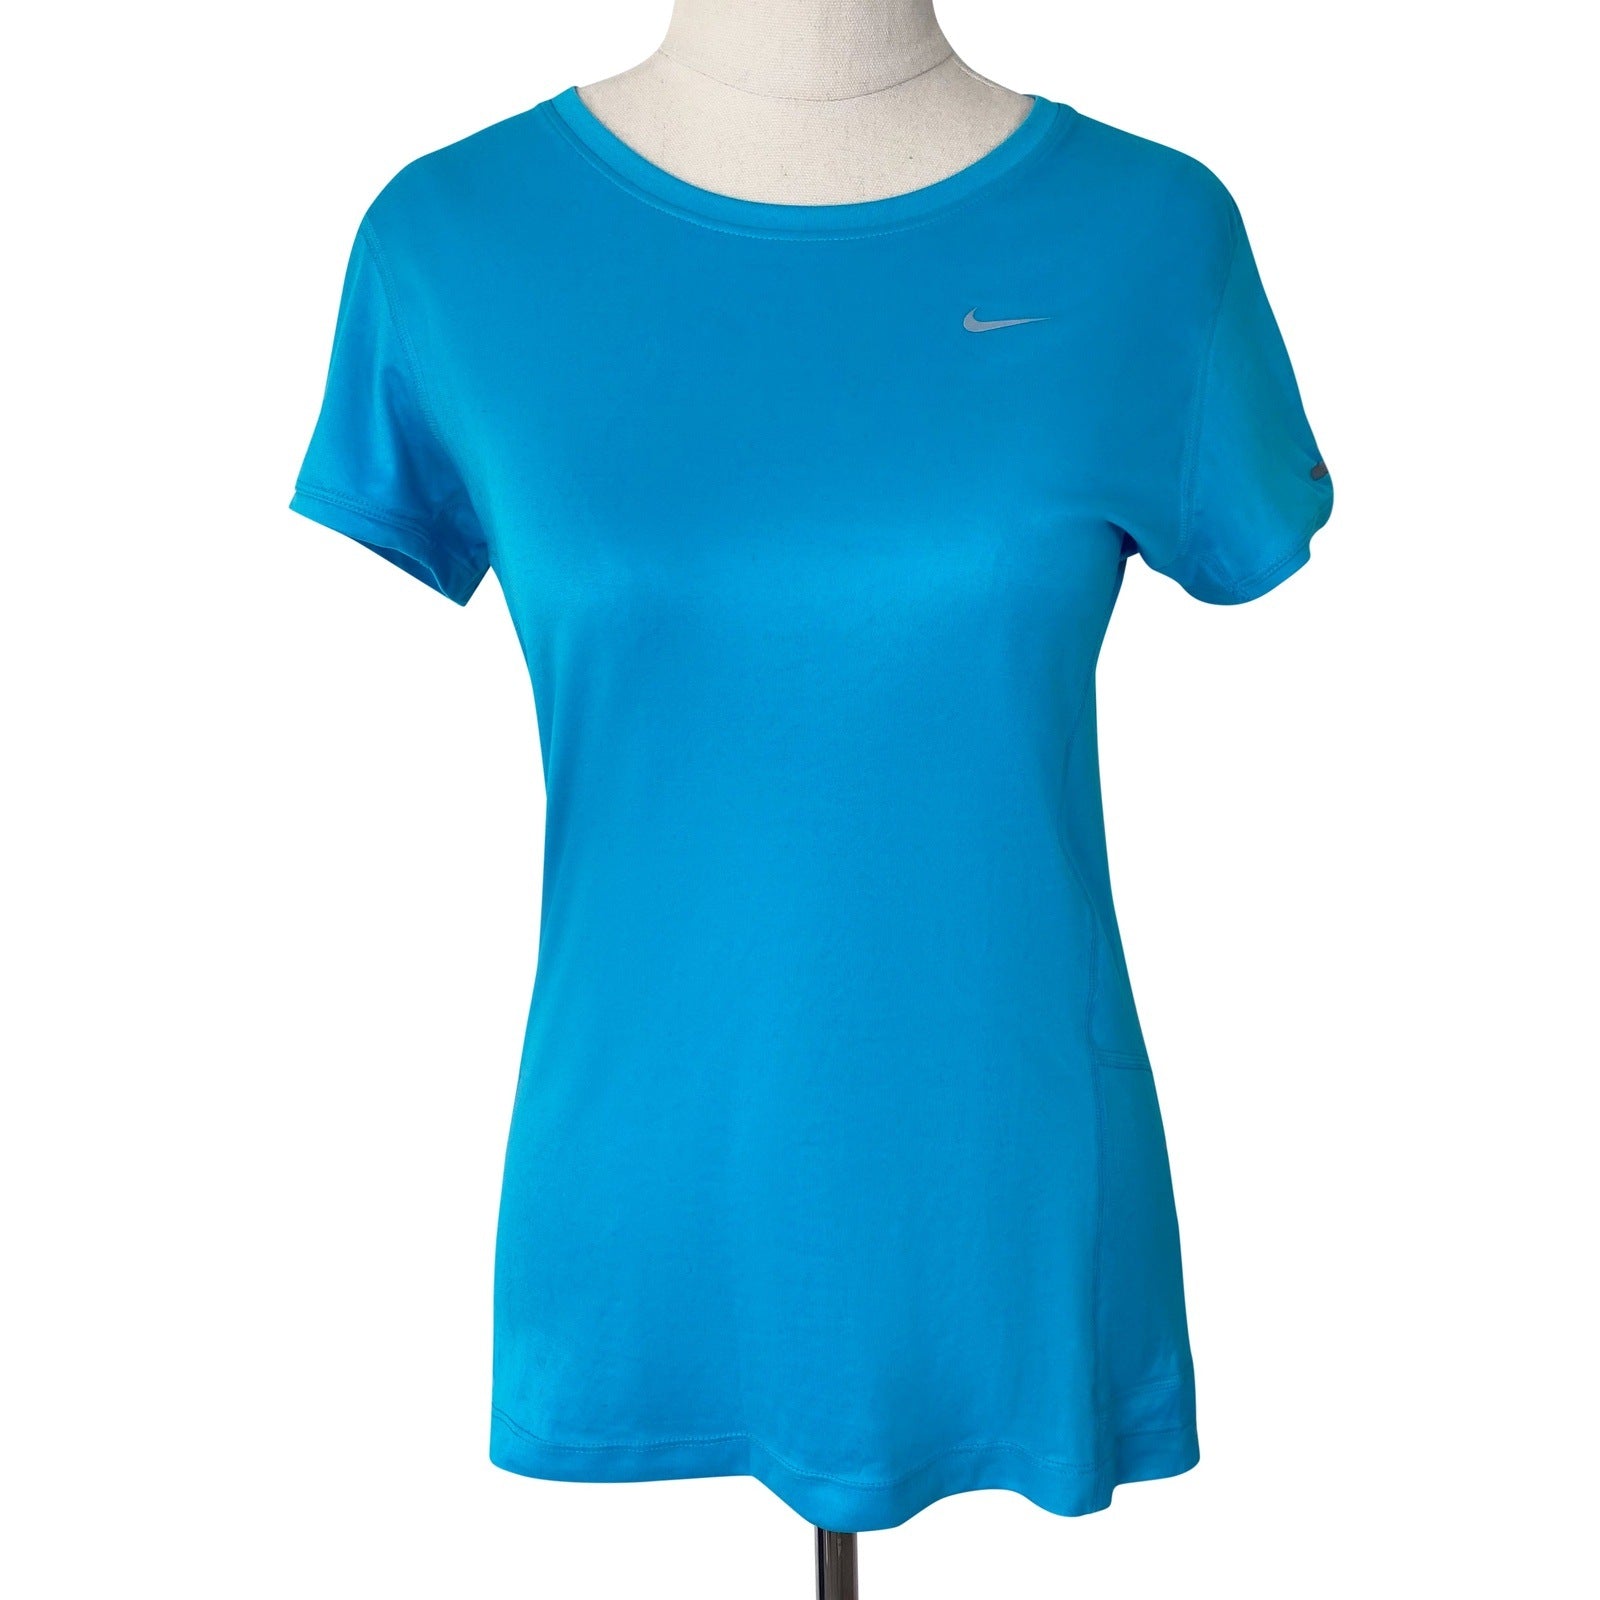 Nike running blue short sleeve top | size small/8